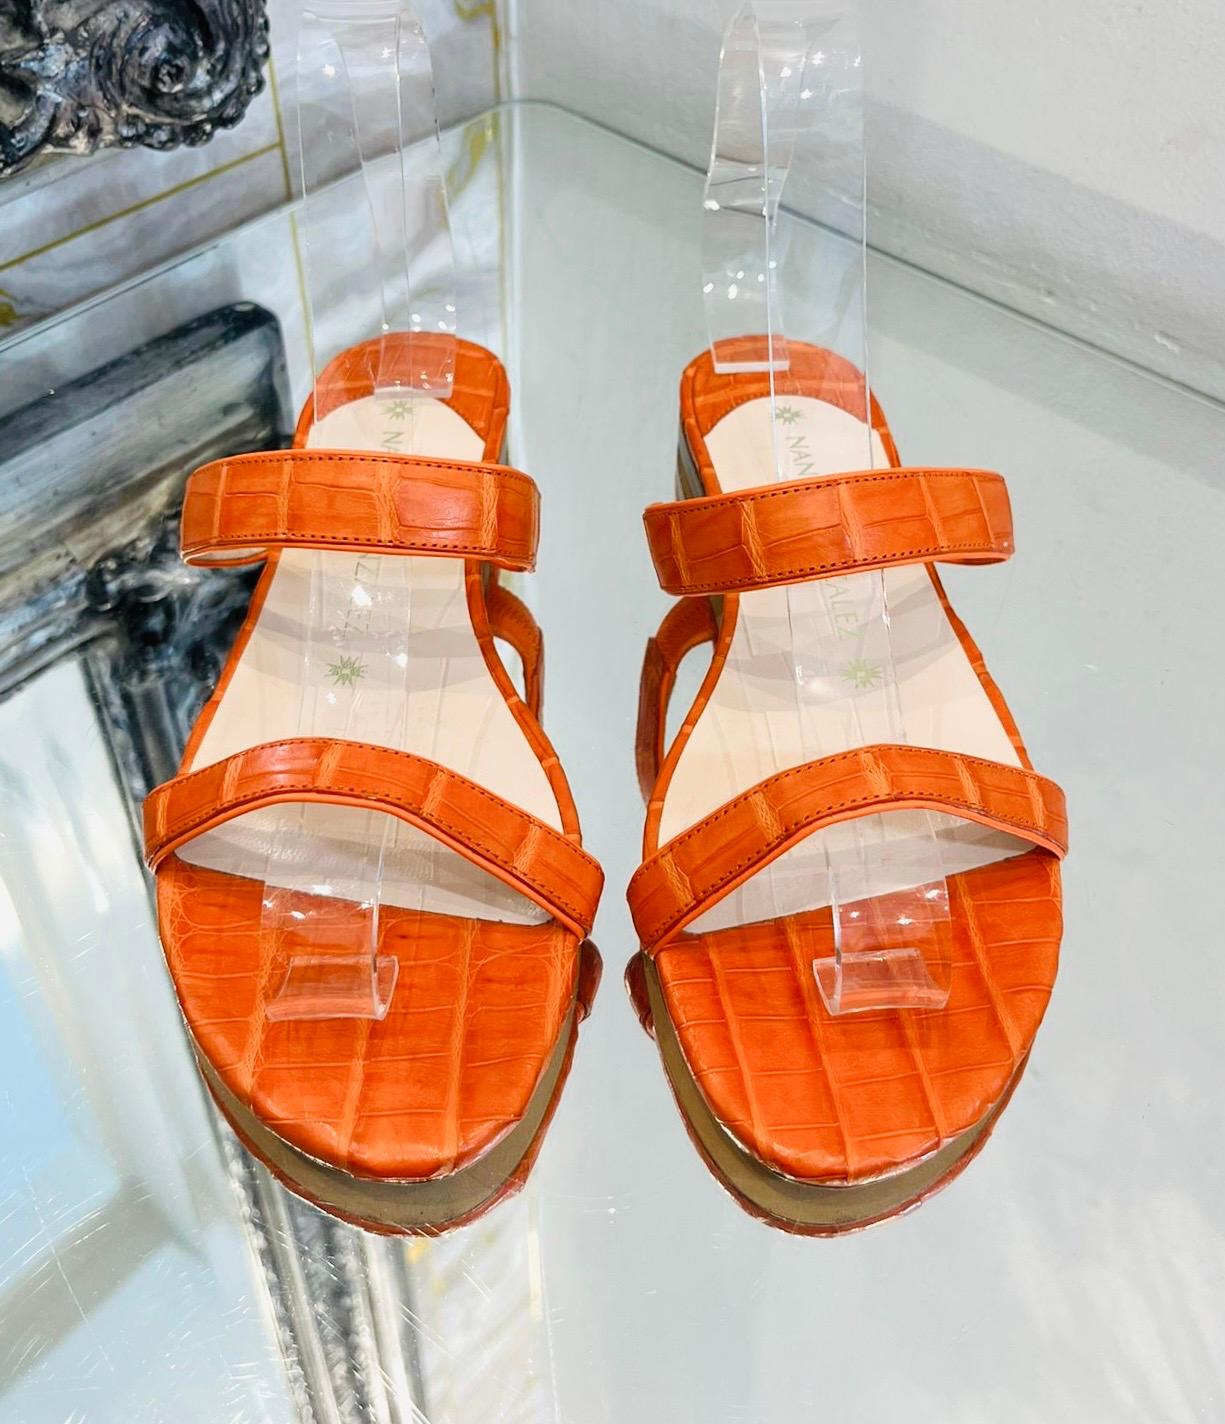 Nancy Gonzalez Crocodile Skin Sandals

Orange 'Frida' crafted crafted in Italy from crocodile skin.

Designed with two straps, open toe and slip-on style. Rrp £630

Size – 36

Condition – Very Good

Composition – Crocodile Skin

Comes with – Shoes